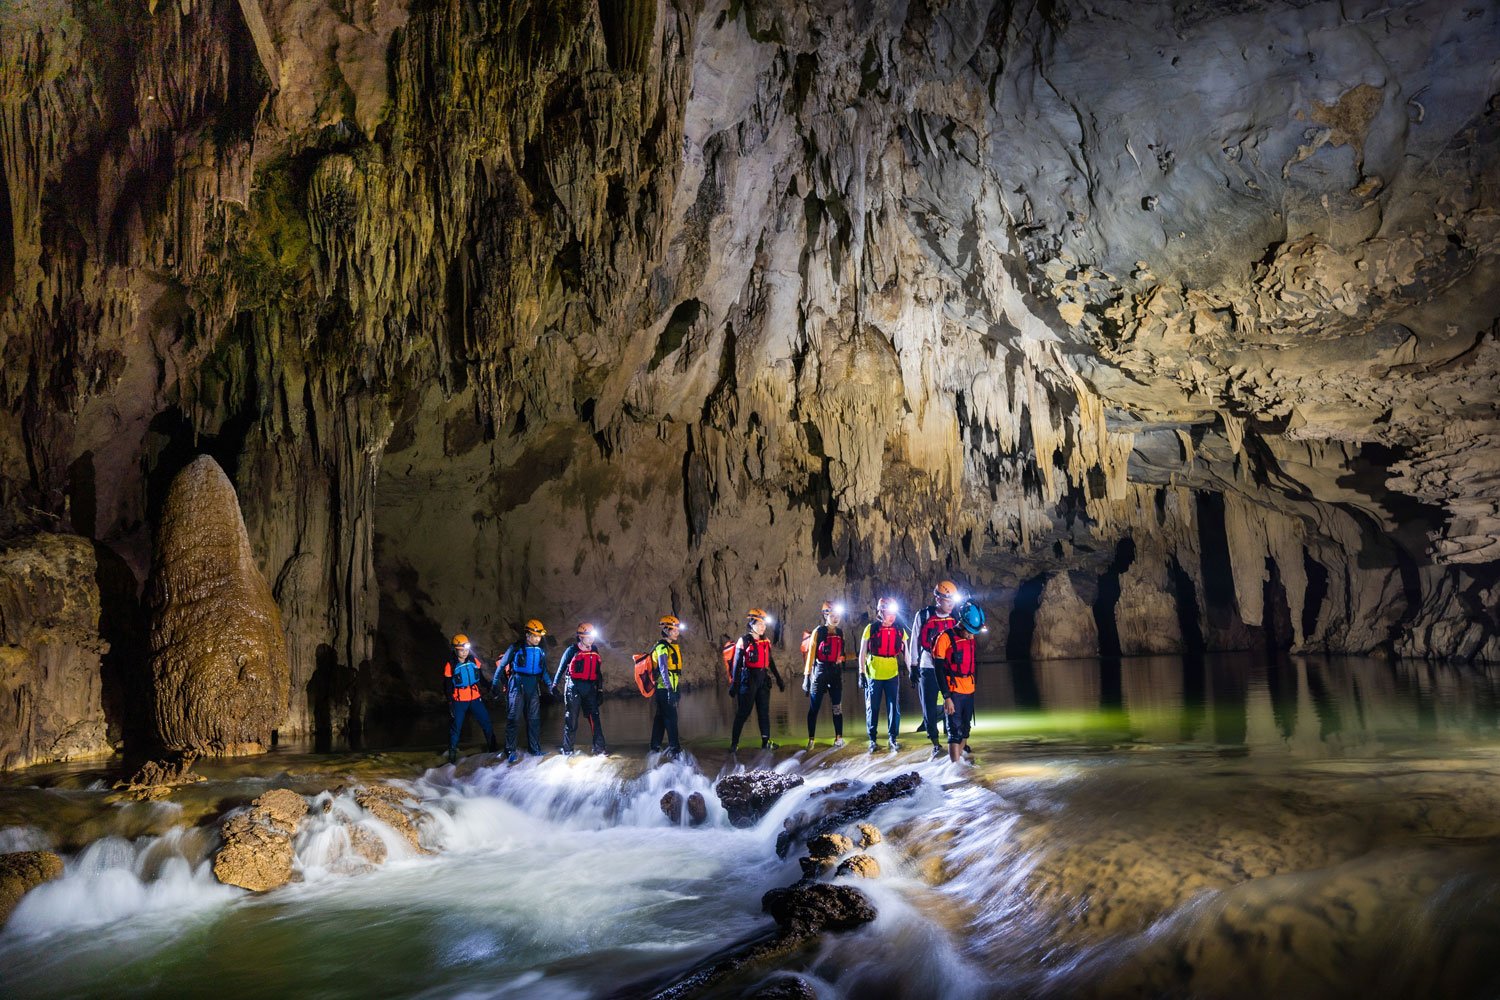 One of the magnificent caves on the Tu Lan Cave Encounter Tour.